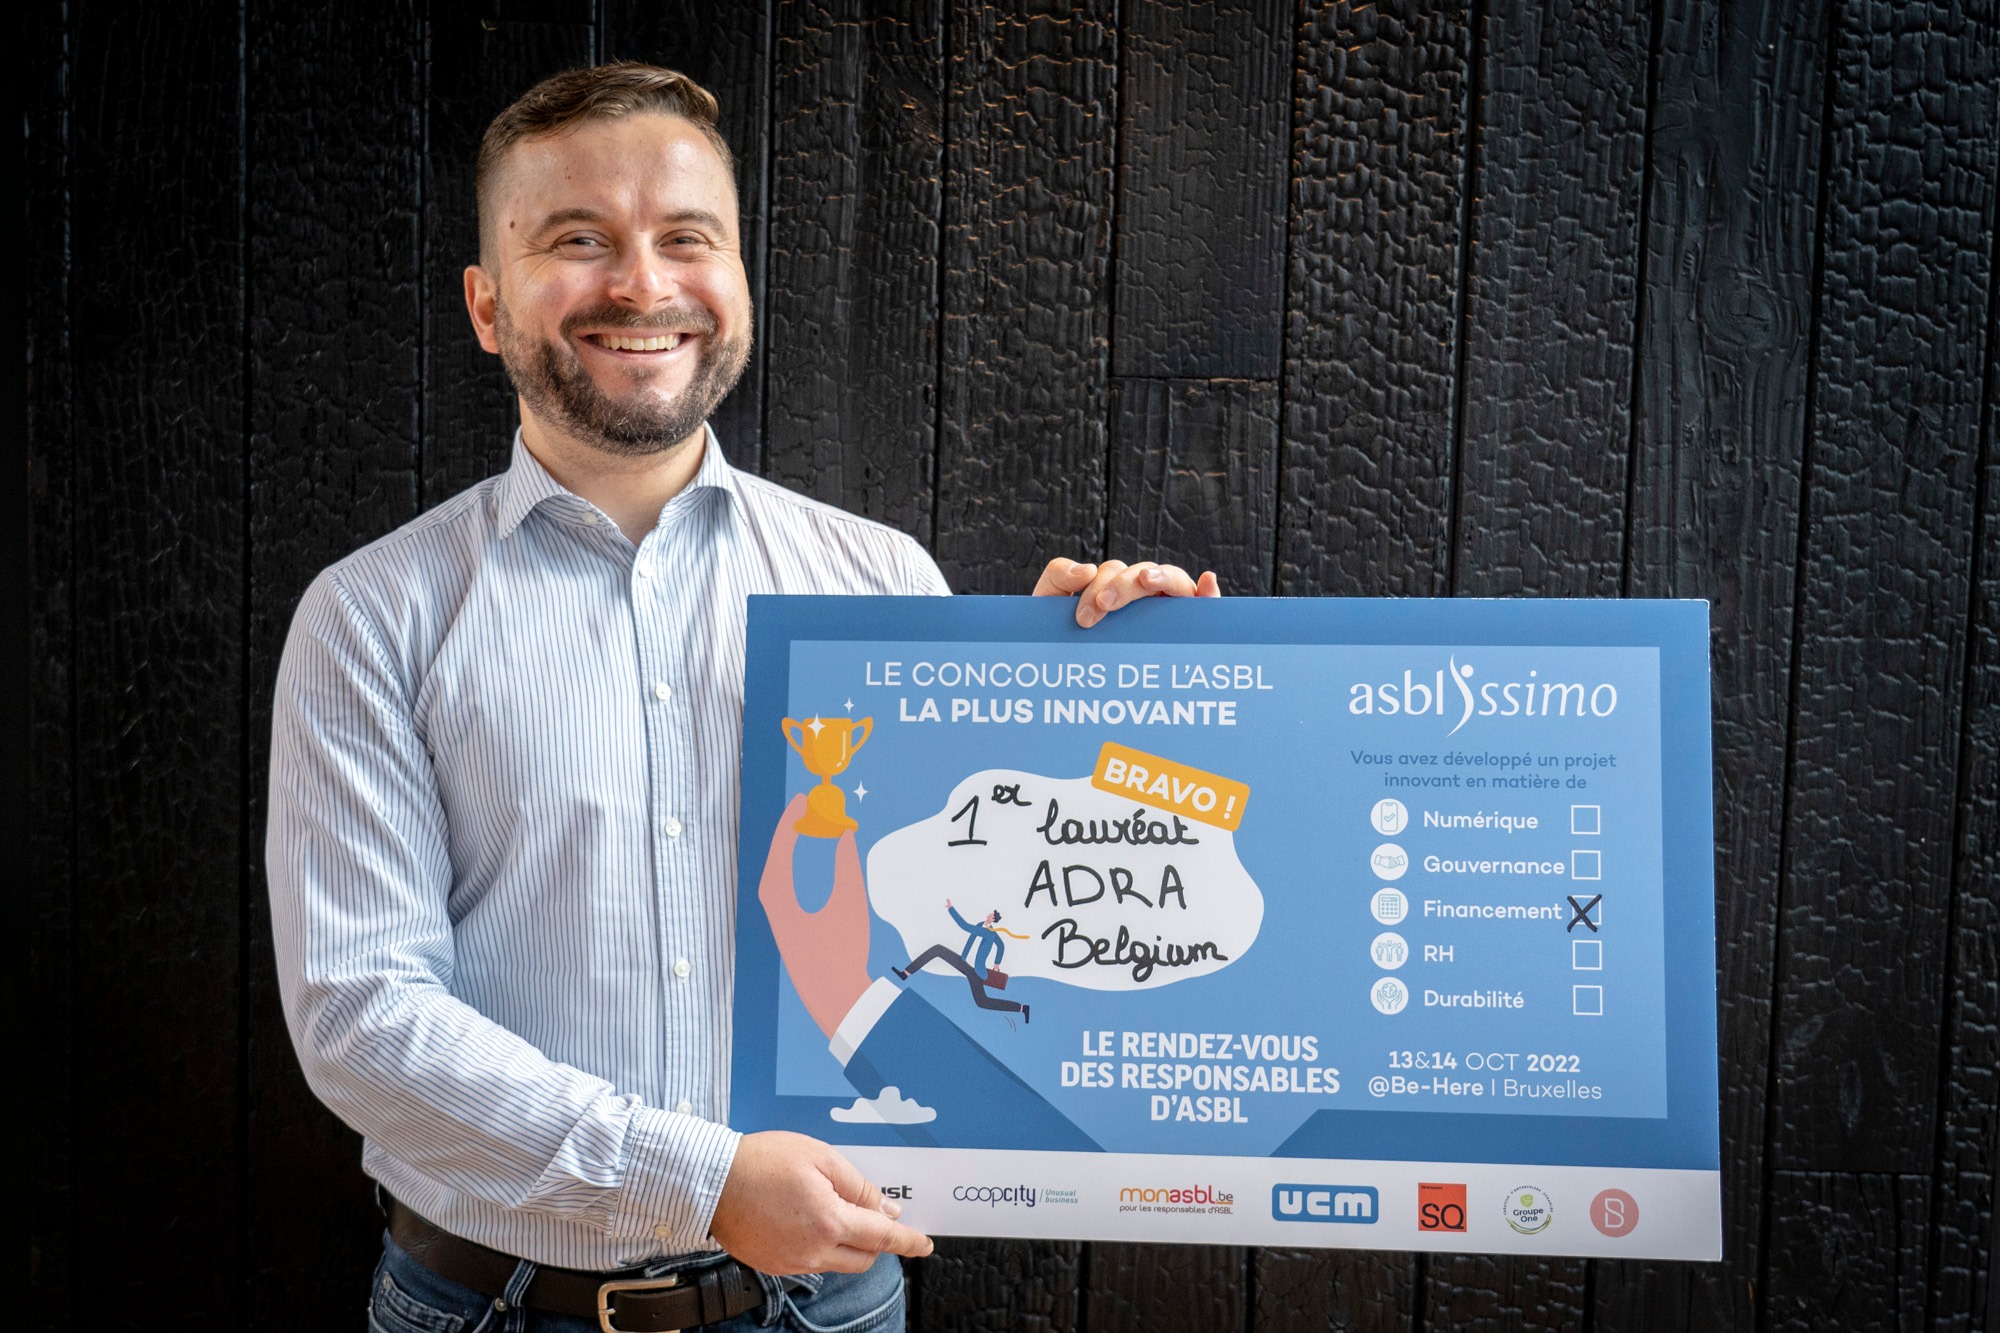 The Social Food Truck brought an innovation prize to ADRA Belgium